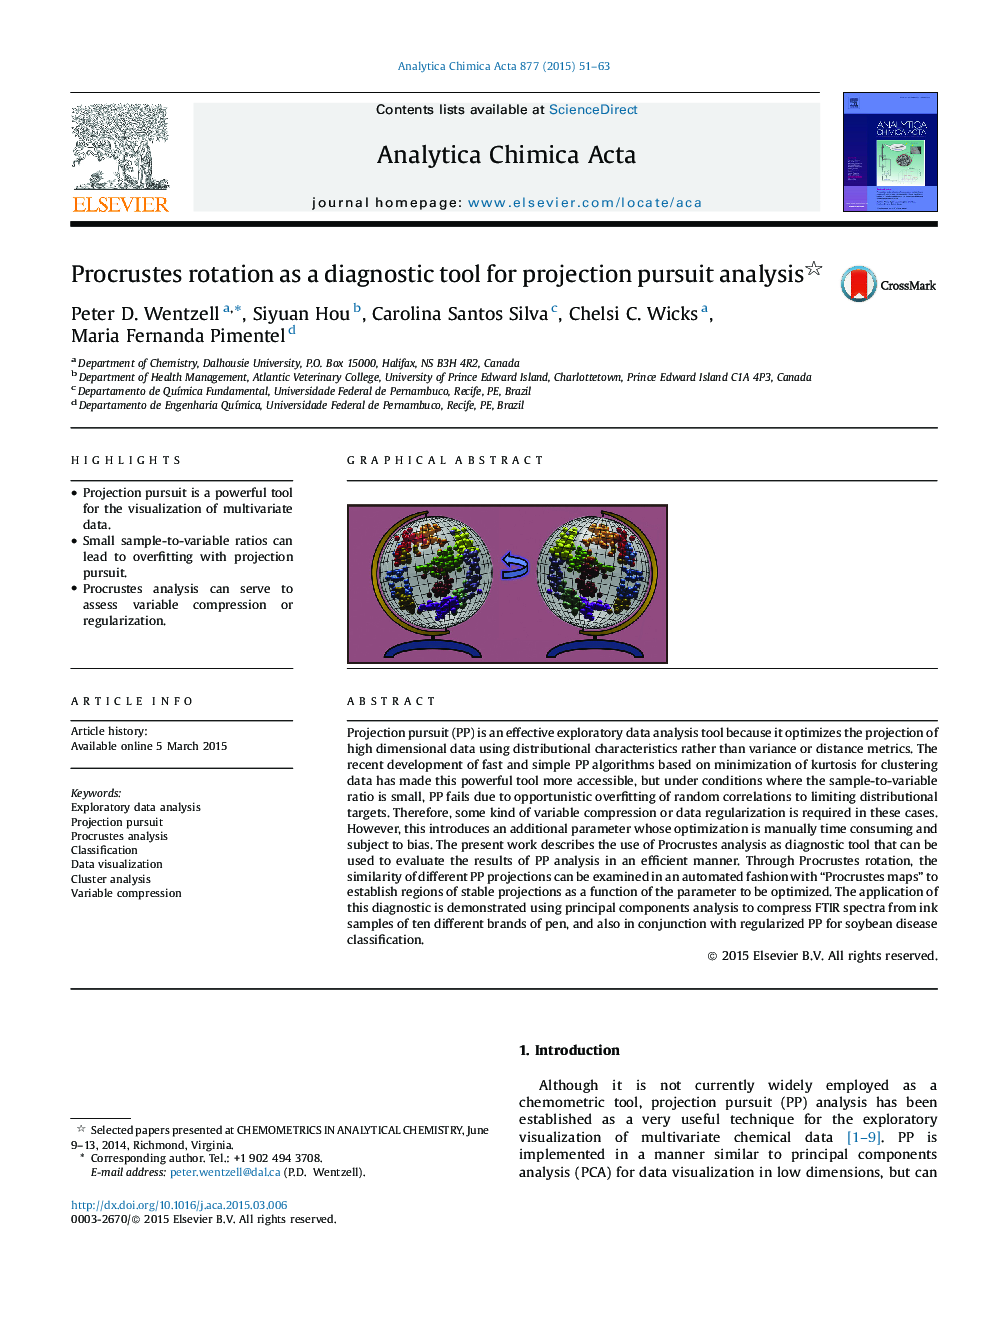 Procrustes rotation as a diagnostic tool for projection pursuit analysis